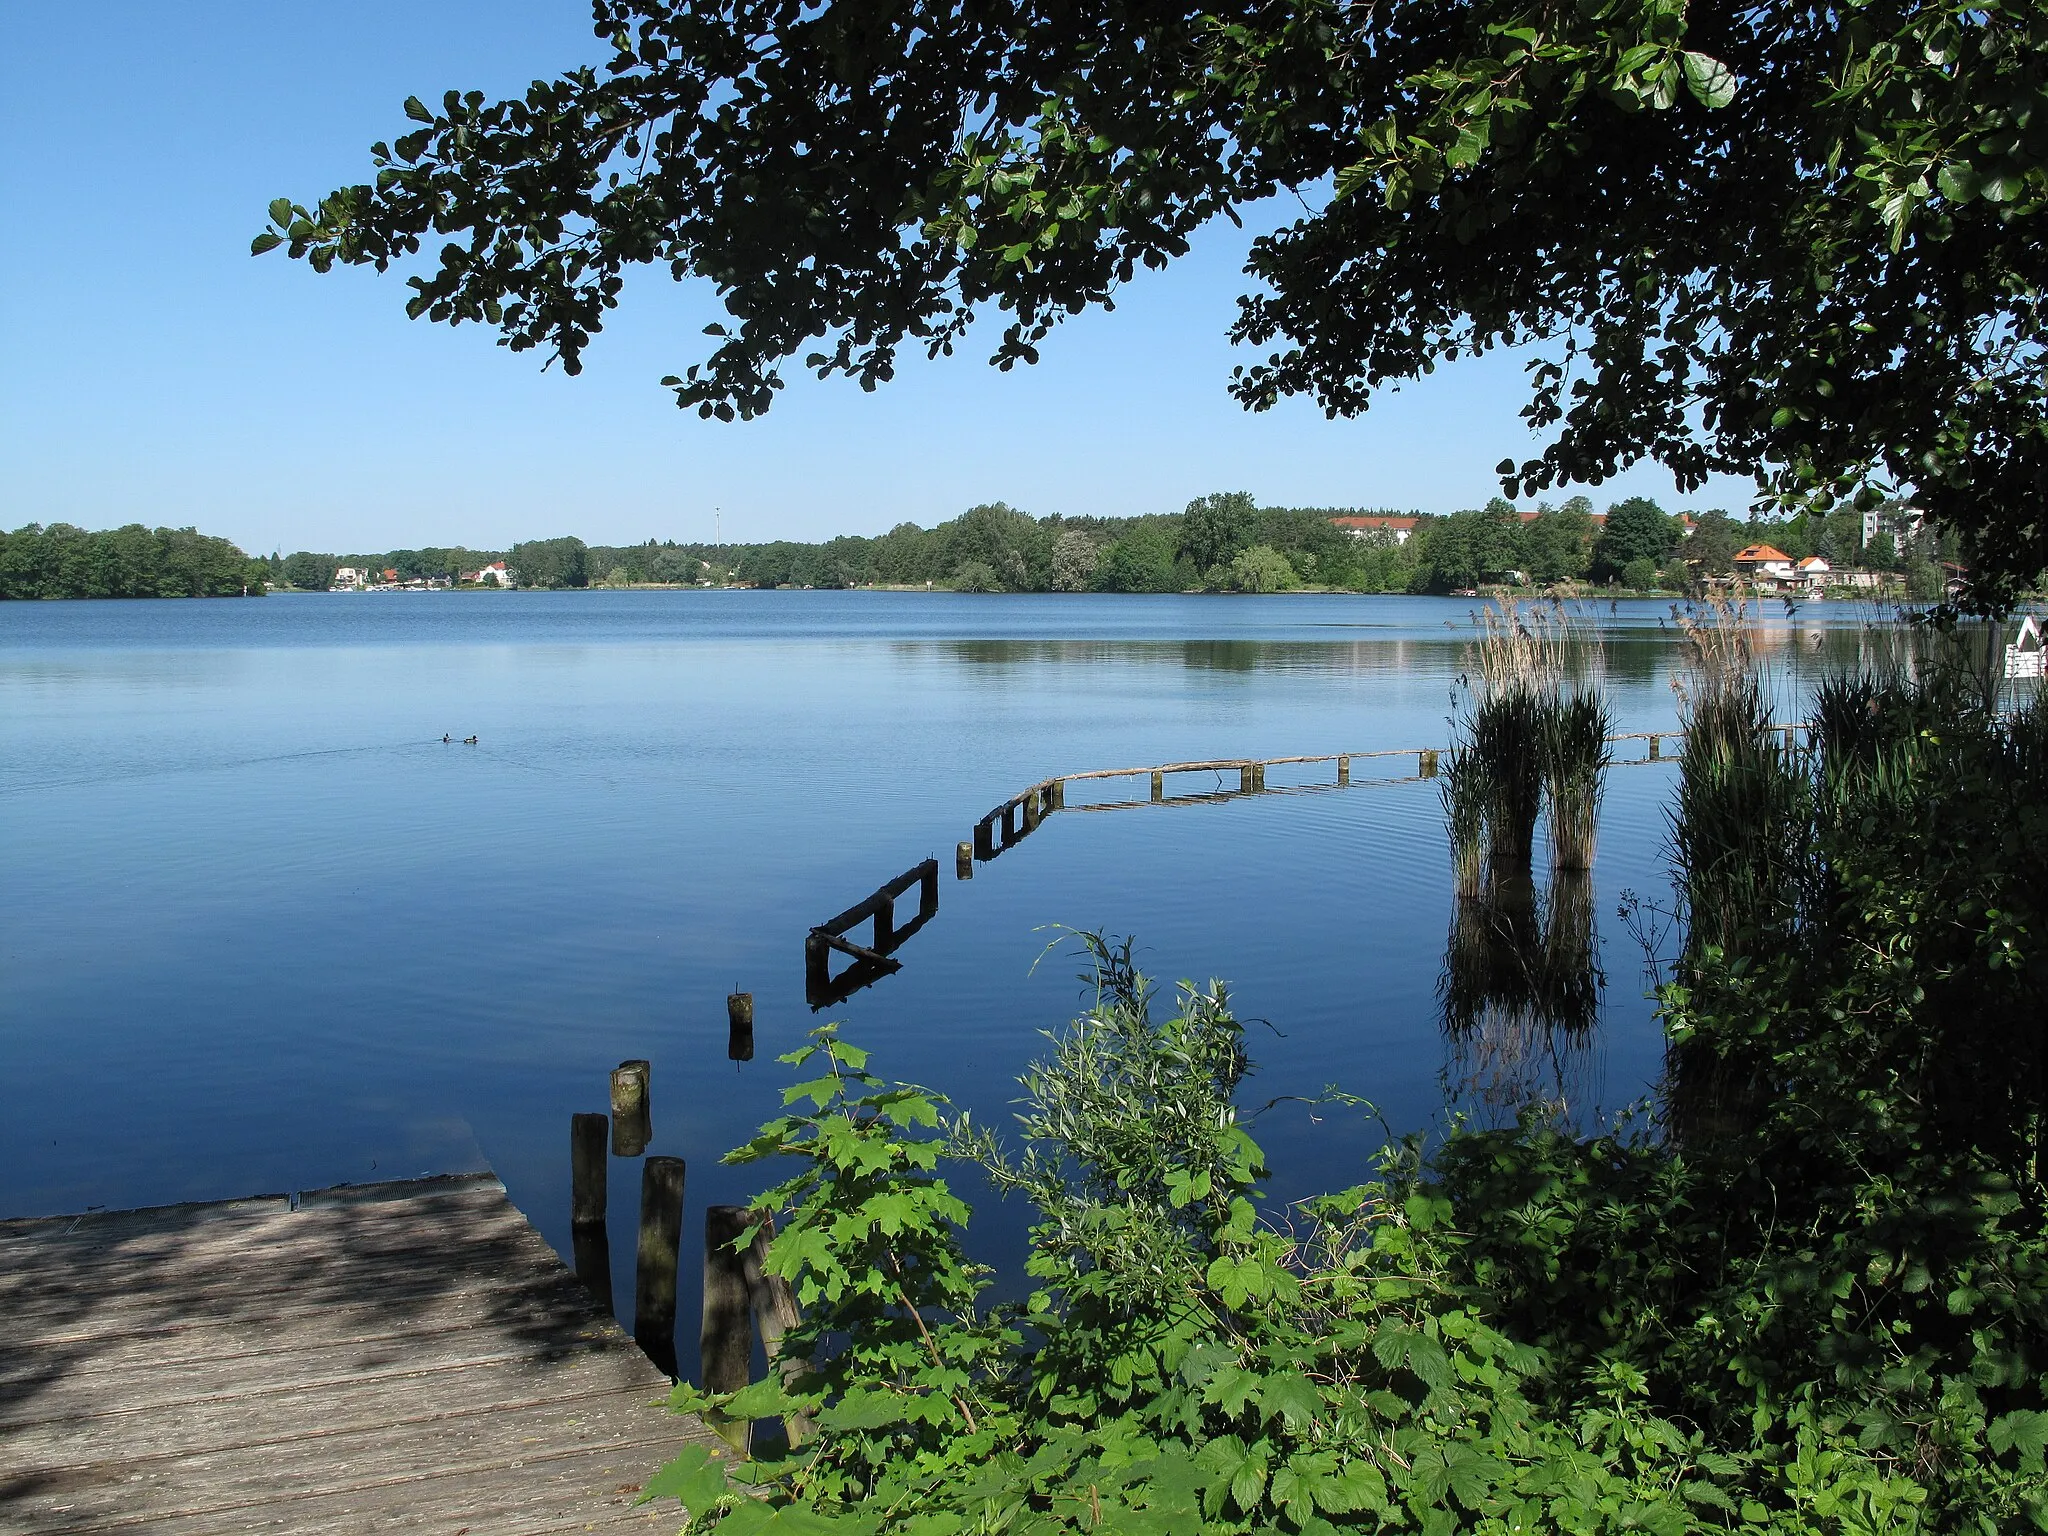 Photo showing: View from the on the east bank of the Werlsee to the island Lindwall. The Werlsee is a lake in Fangschleuse and Grünheide, parts of the municipality Grünheide, District Oder-Spree, Brandenburg, Germany. The lake covers 60 hectare.